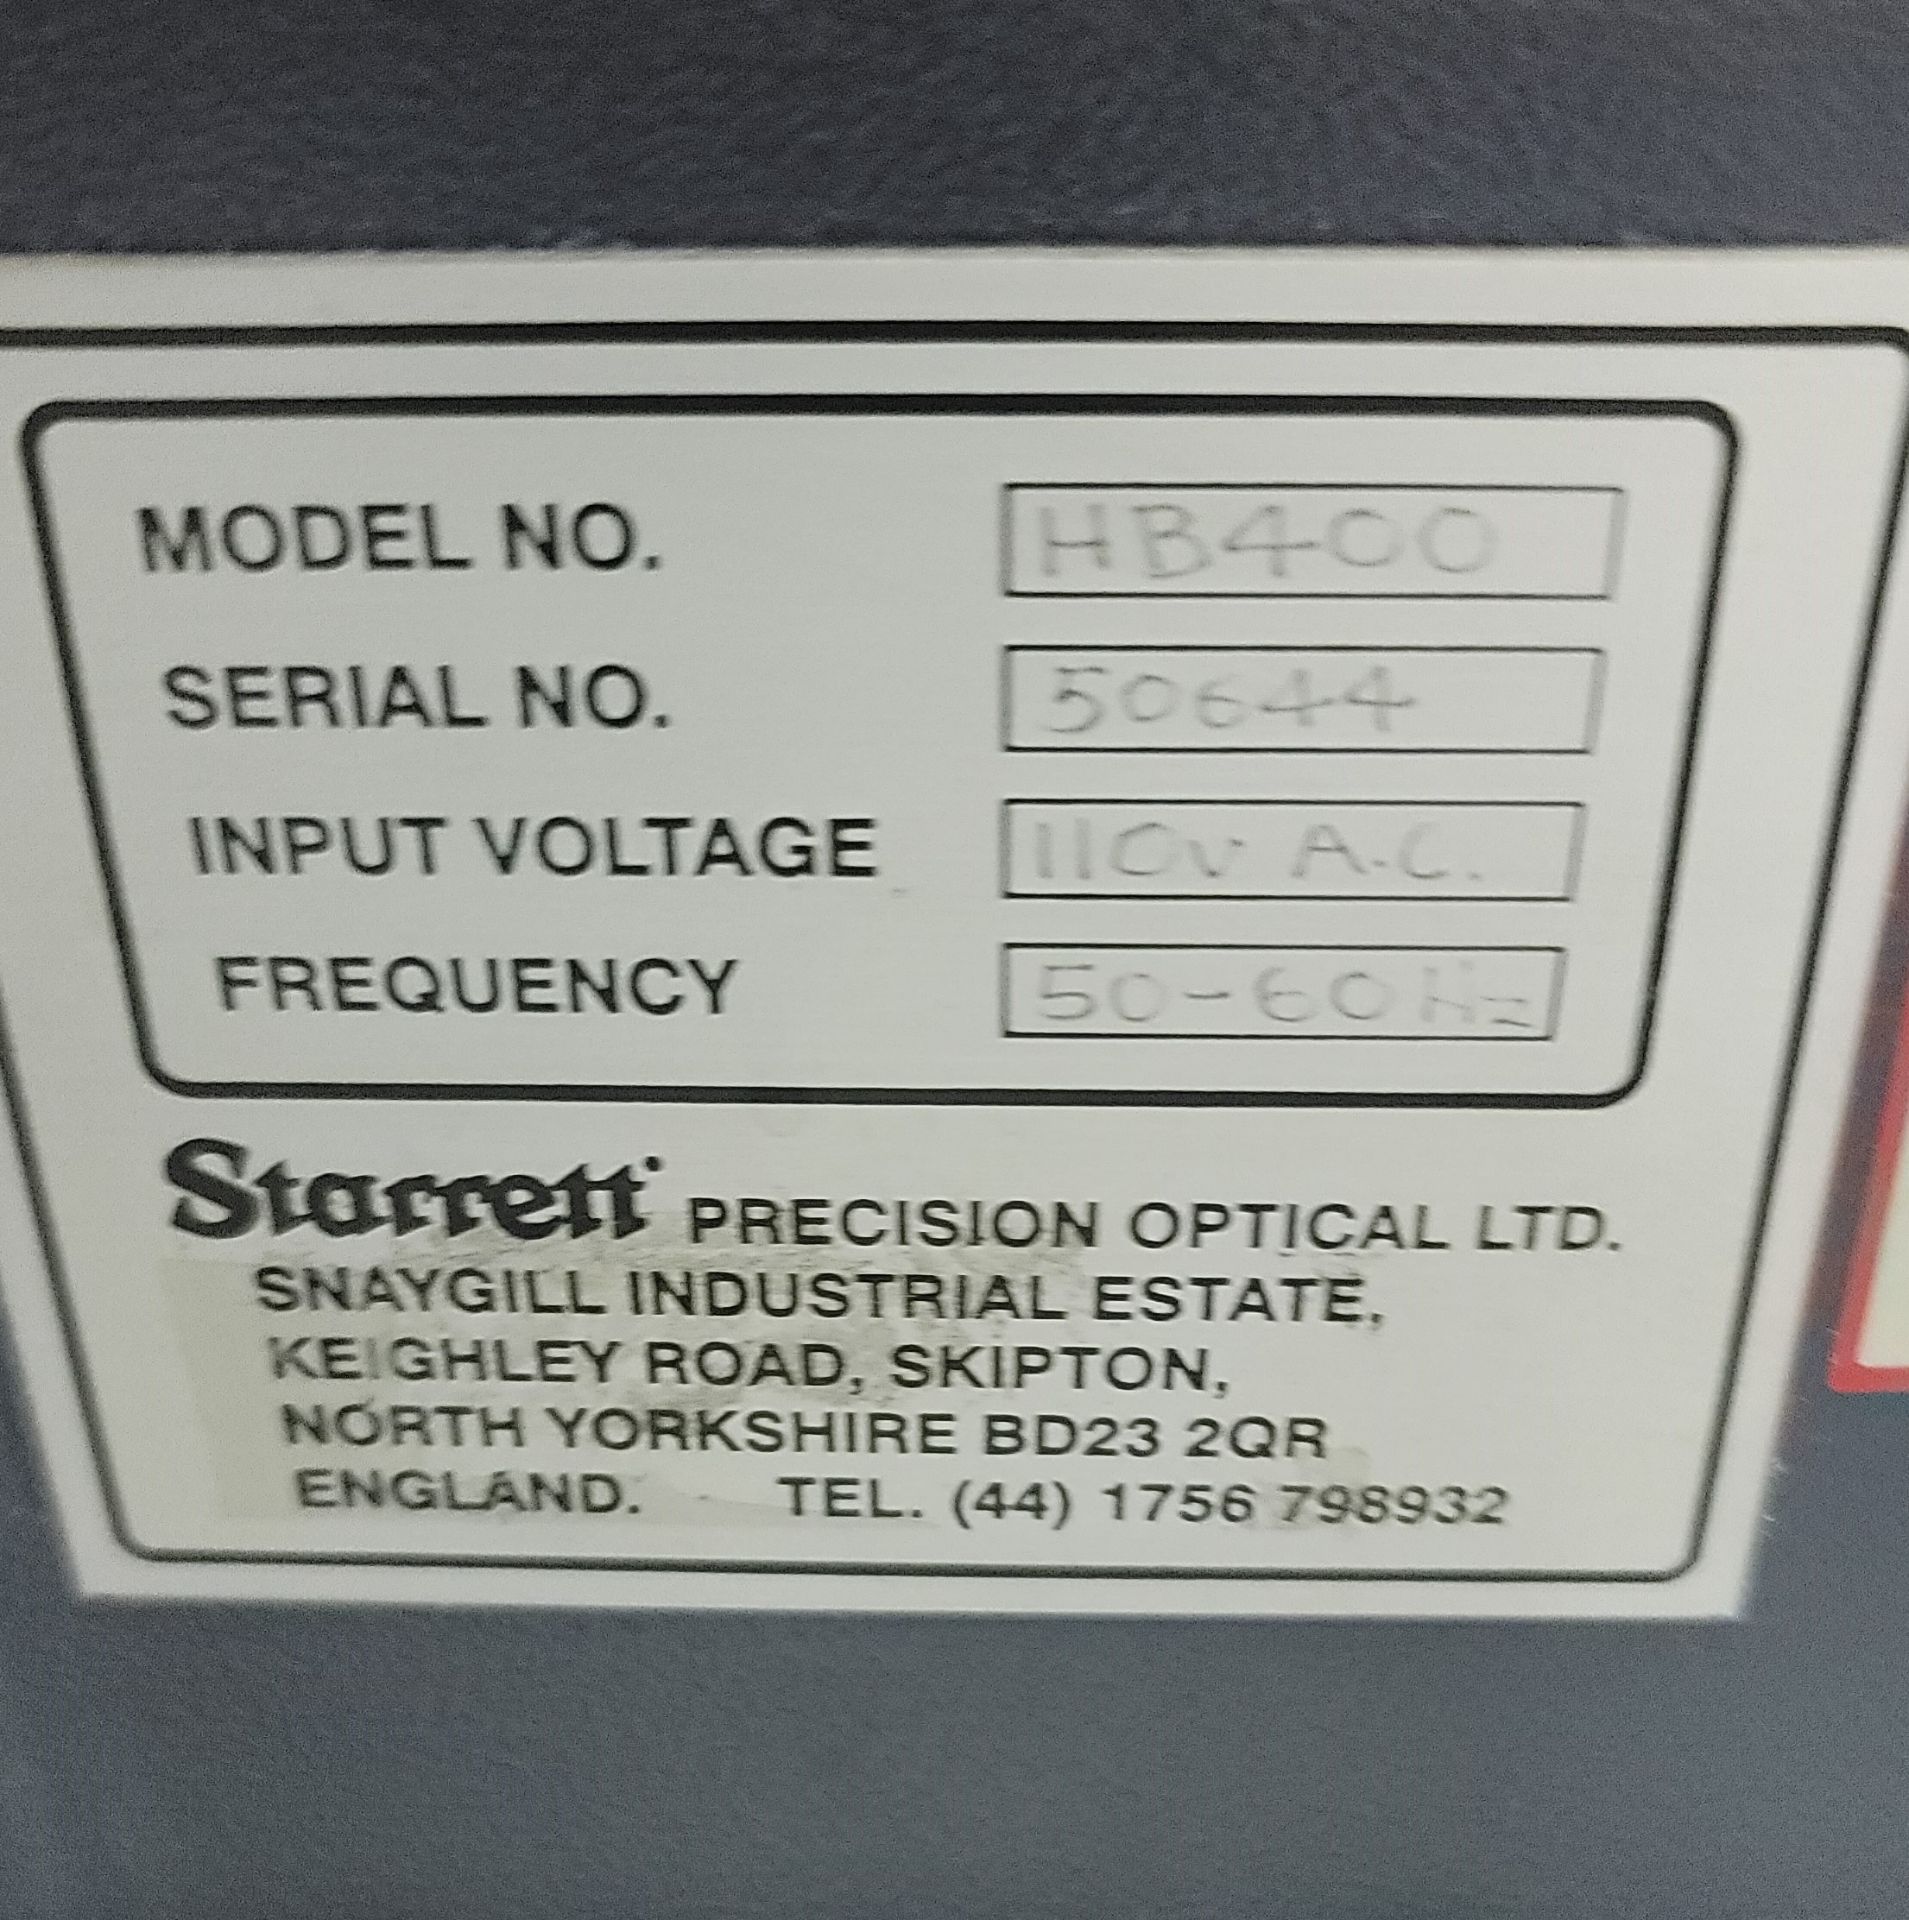 STARRETT HB400 BENCHTOP OPTICAL COMPARATOR, S/N 50644, W/ CABINET STAND, **IMMEX REGISTERED - Image 5 of 5